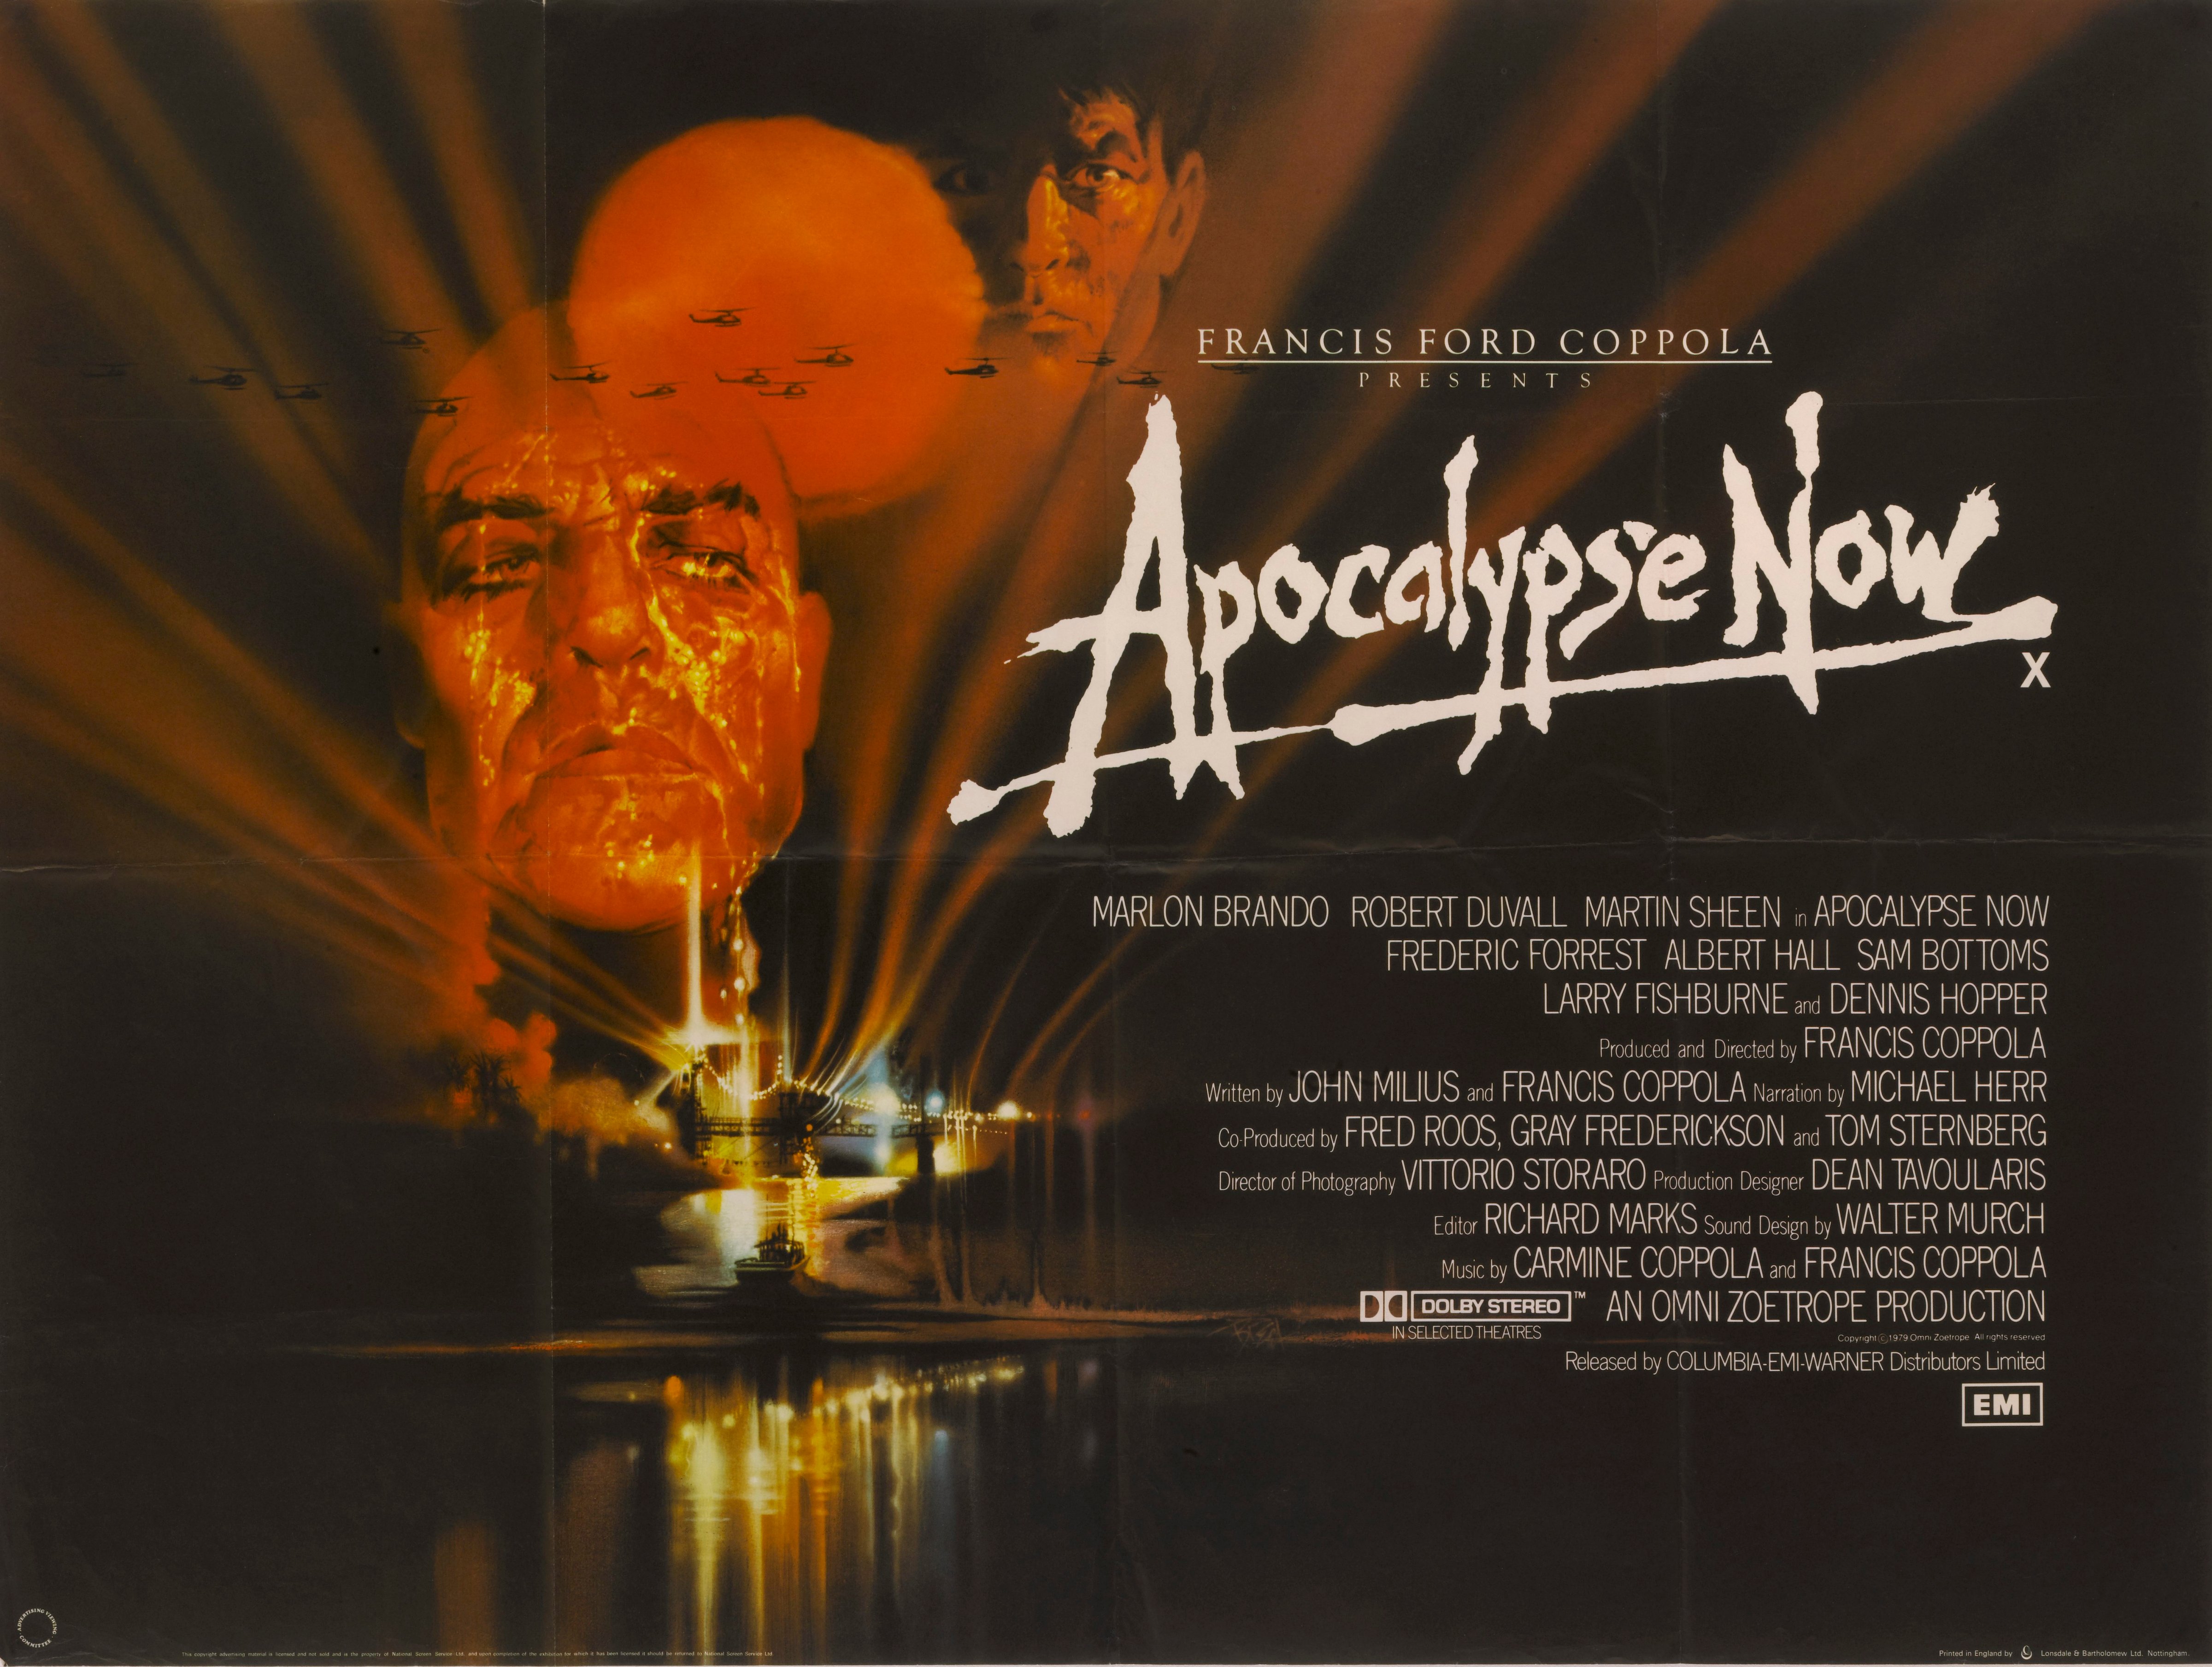 A movie poster signed by Francis Ford Coppola  for his 1979 Vietnam War drama 'Apocalypse Now' starring Marlon Brando and Martin Sheen. (Getty Images)